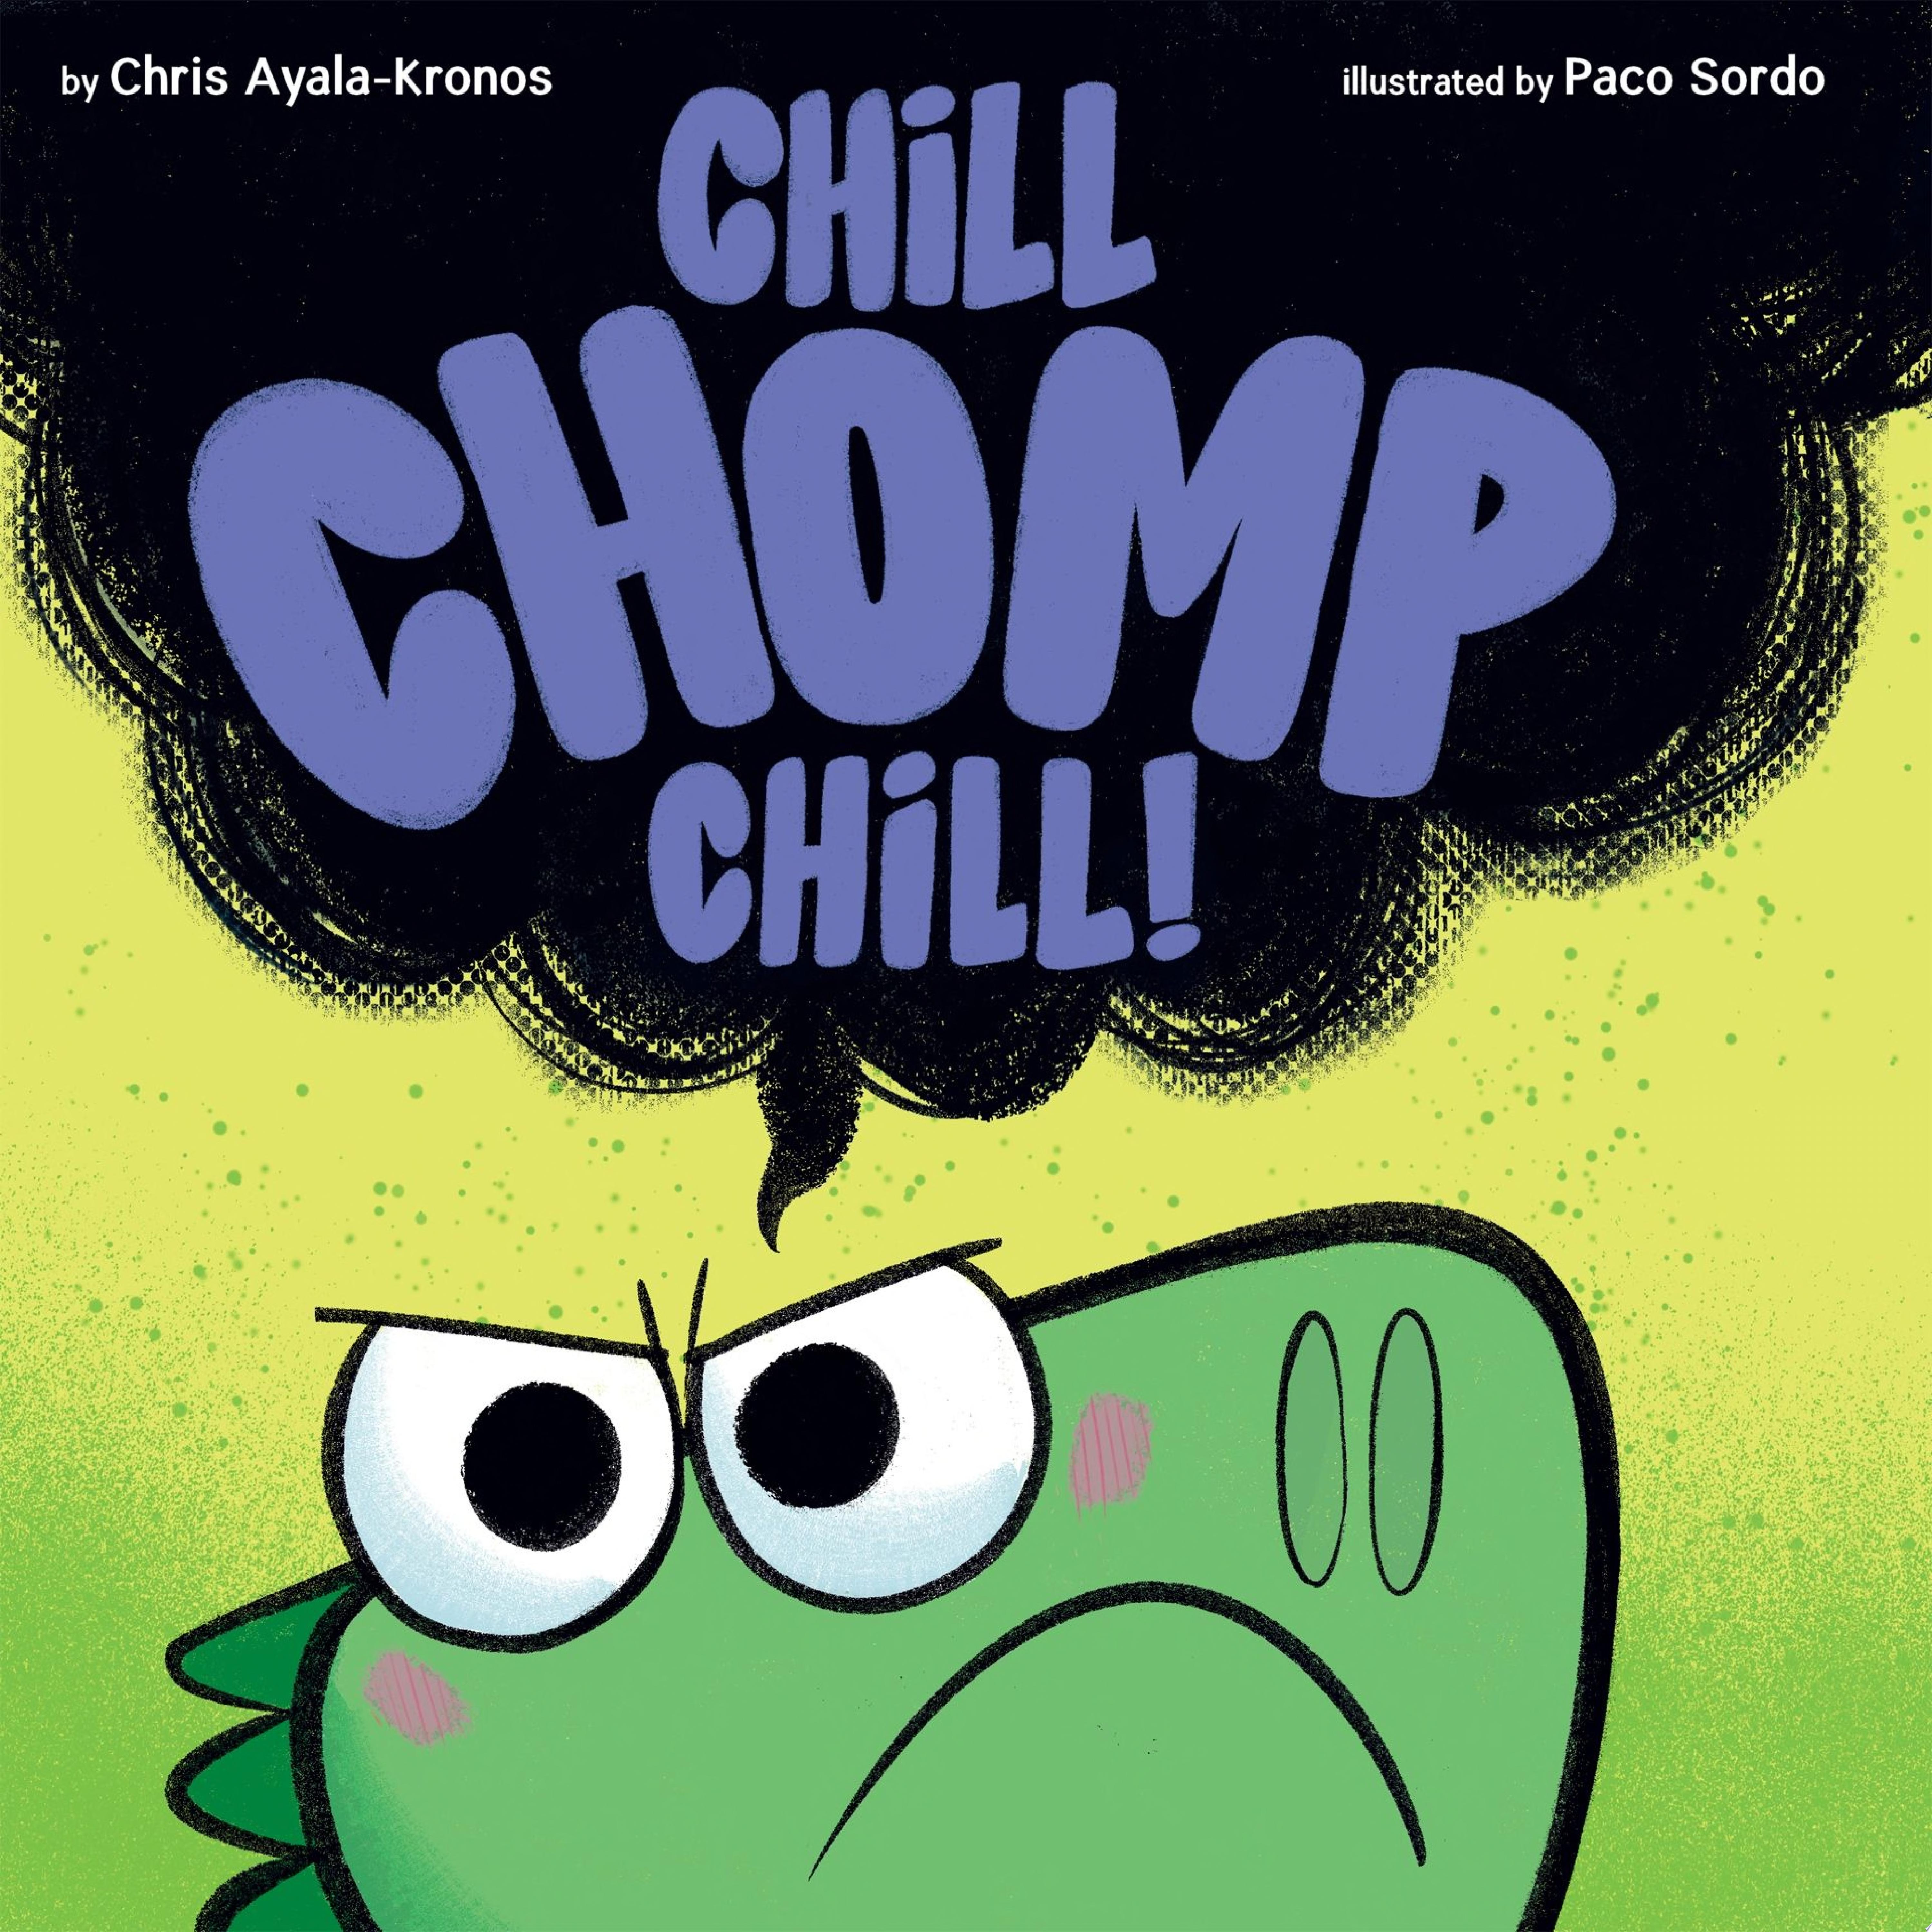 Image for "Chill, Chomp, Chill!"